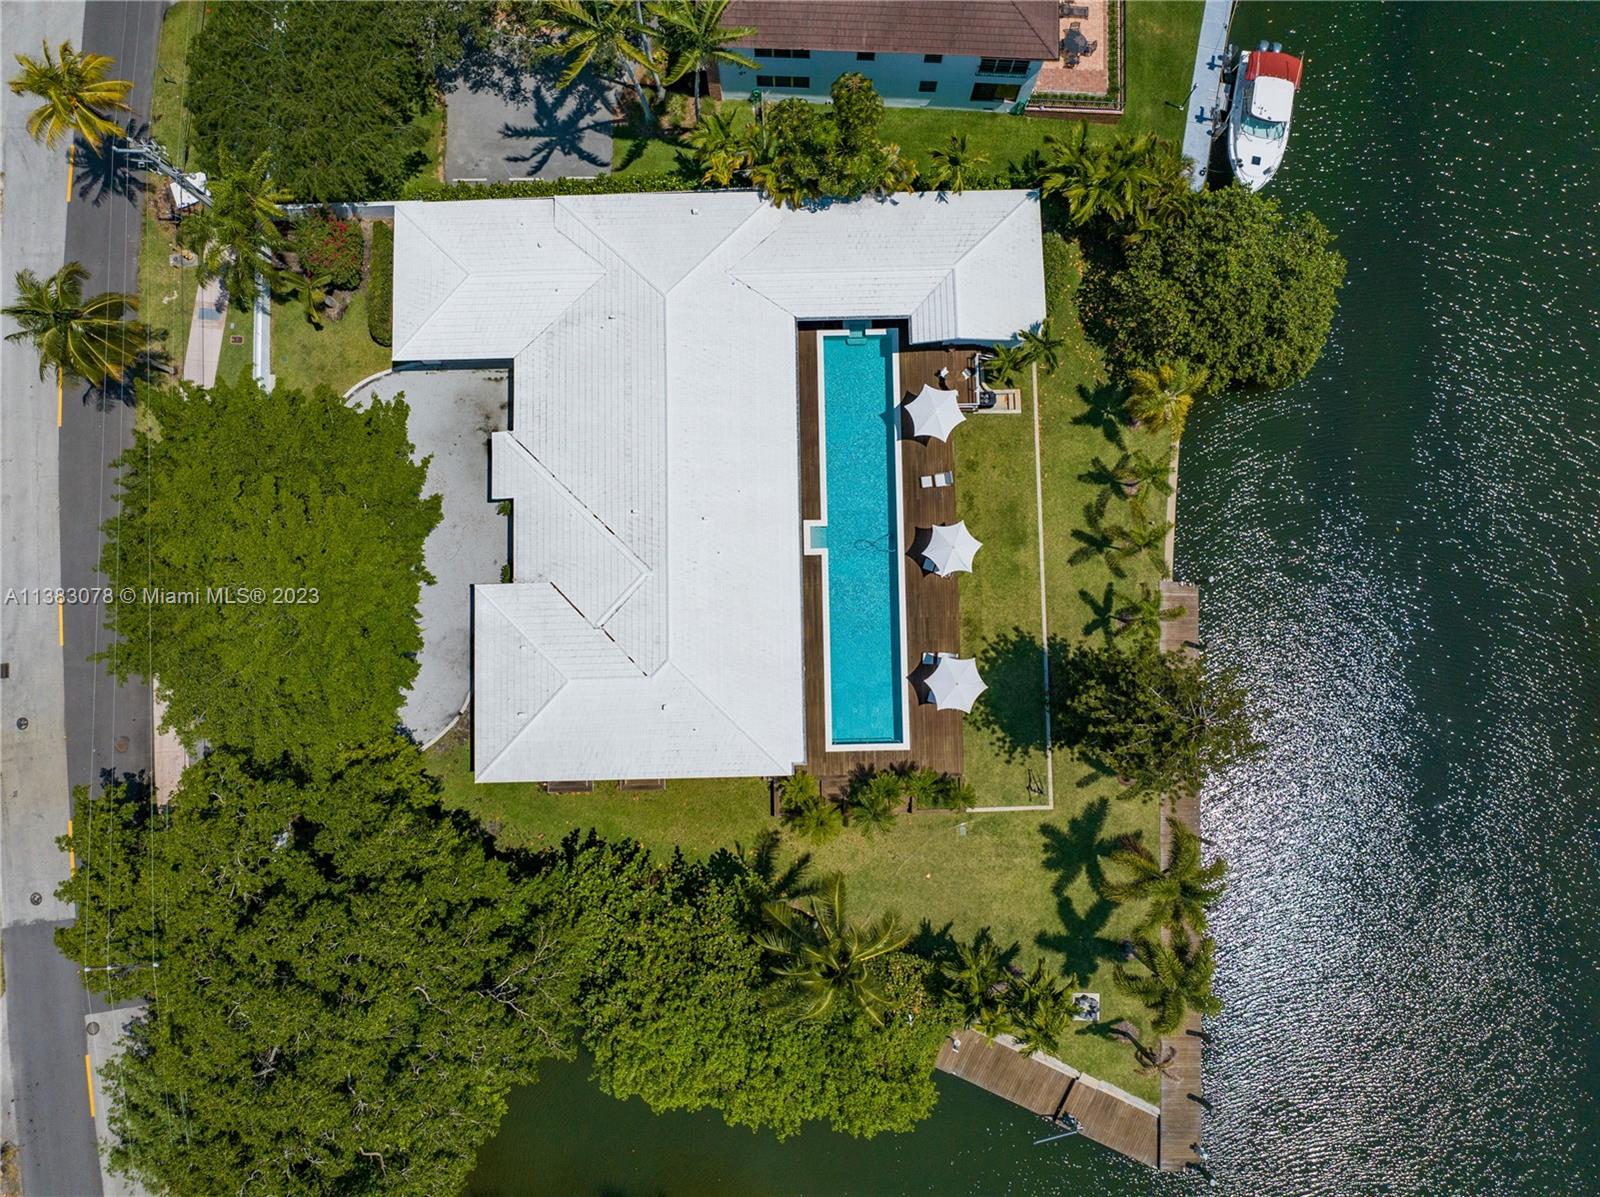 Coral Gables Waterway Home. Wide Canal frontage with 100’ Dock facing North, 40' Dock facing East, allowing the most enthusiastic Angler to dock his pride and Joy. Bridge clearance 12'-18' Height, 15 minutes to Intercoastal. A renovated home using the most selective materials such as Onyx, Quartz, Exquisite Marble, European Hardware, Quartz Kitchen Counter tops. Kitchen is for the Chef in mind, 4 Thermador Column Style Refrigerators, Freezers, and Wine station, two Separate Sink Stations, two separate Cooking Surfaces and Ovens, next to Kitchen Servants quarters. The kitchen leads to a Private Chef Table, seats 10. This 6 Bedrooms, 6 1/2 Bathrooms, Office, 2 Dining areas a great Grand Room overlooking a majestic pool, spacious green area and Waterways. Impact windows and doors